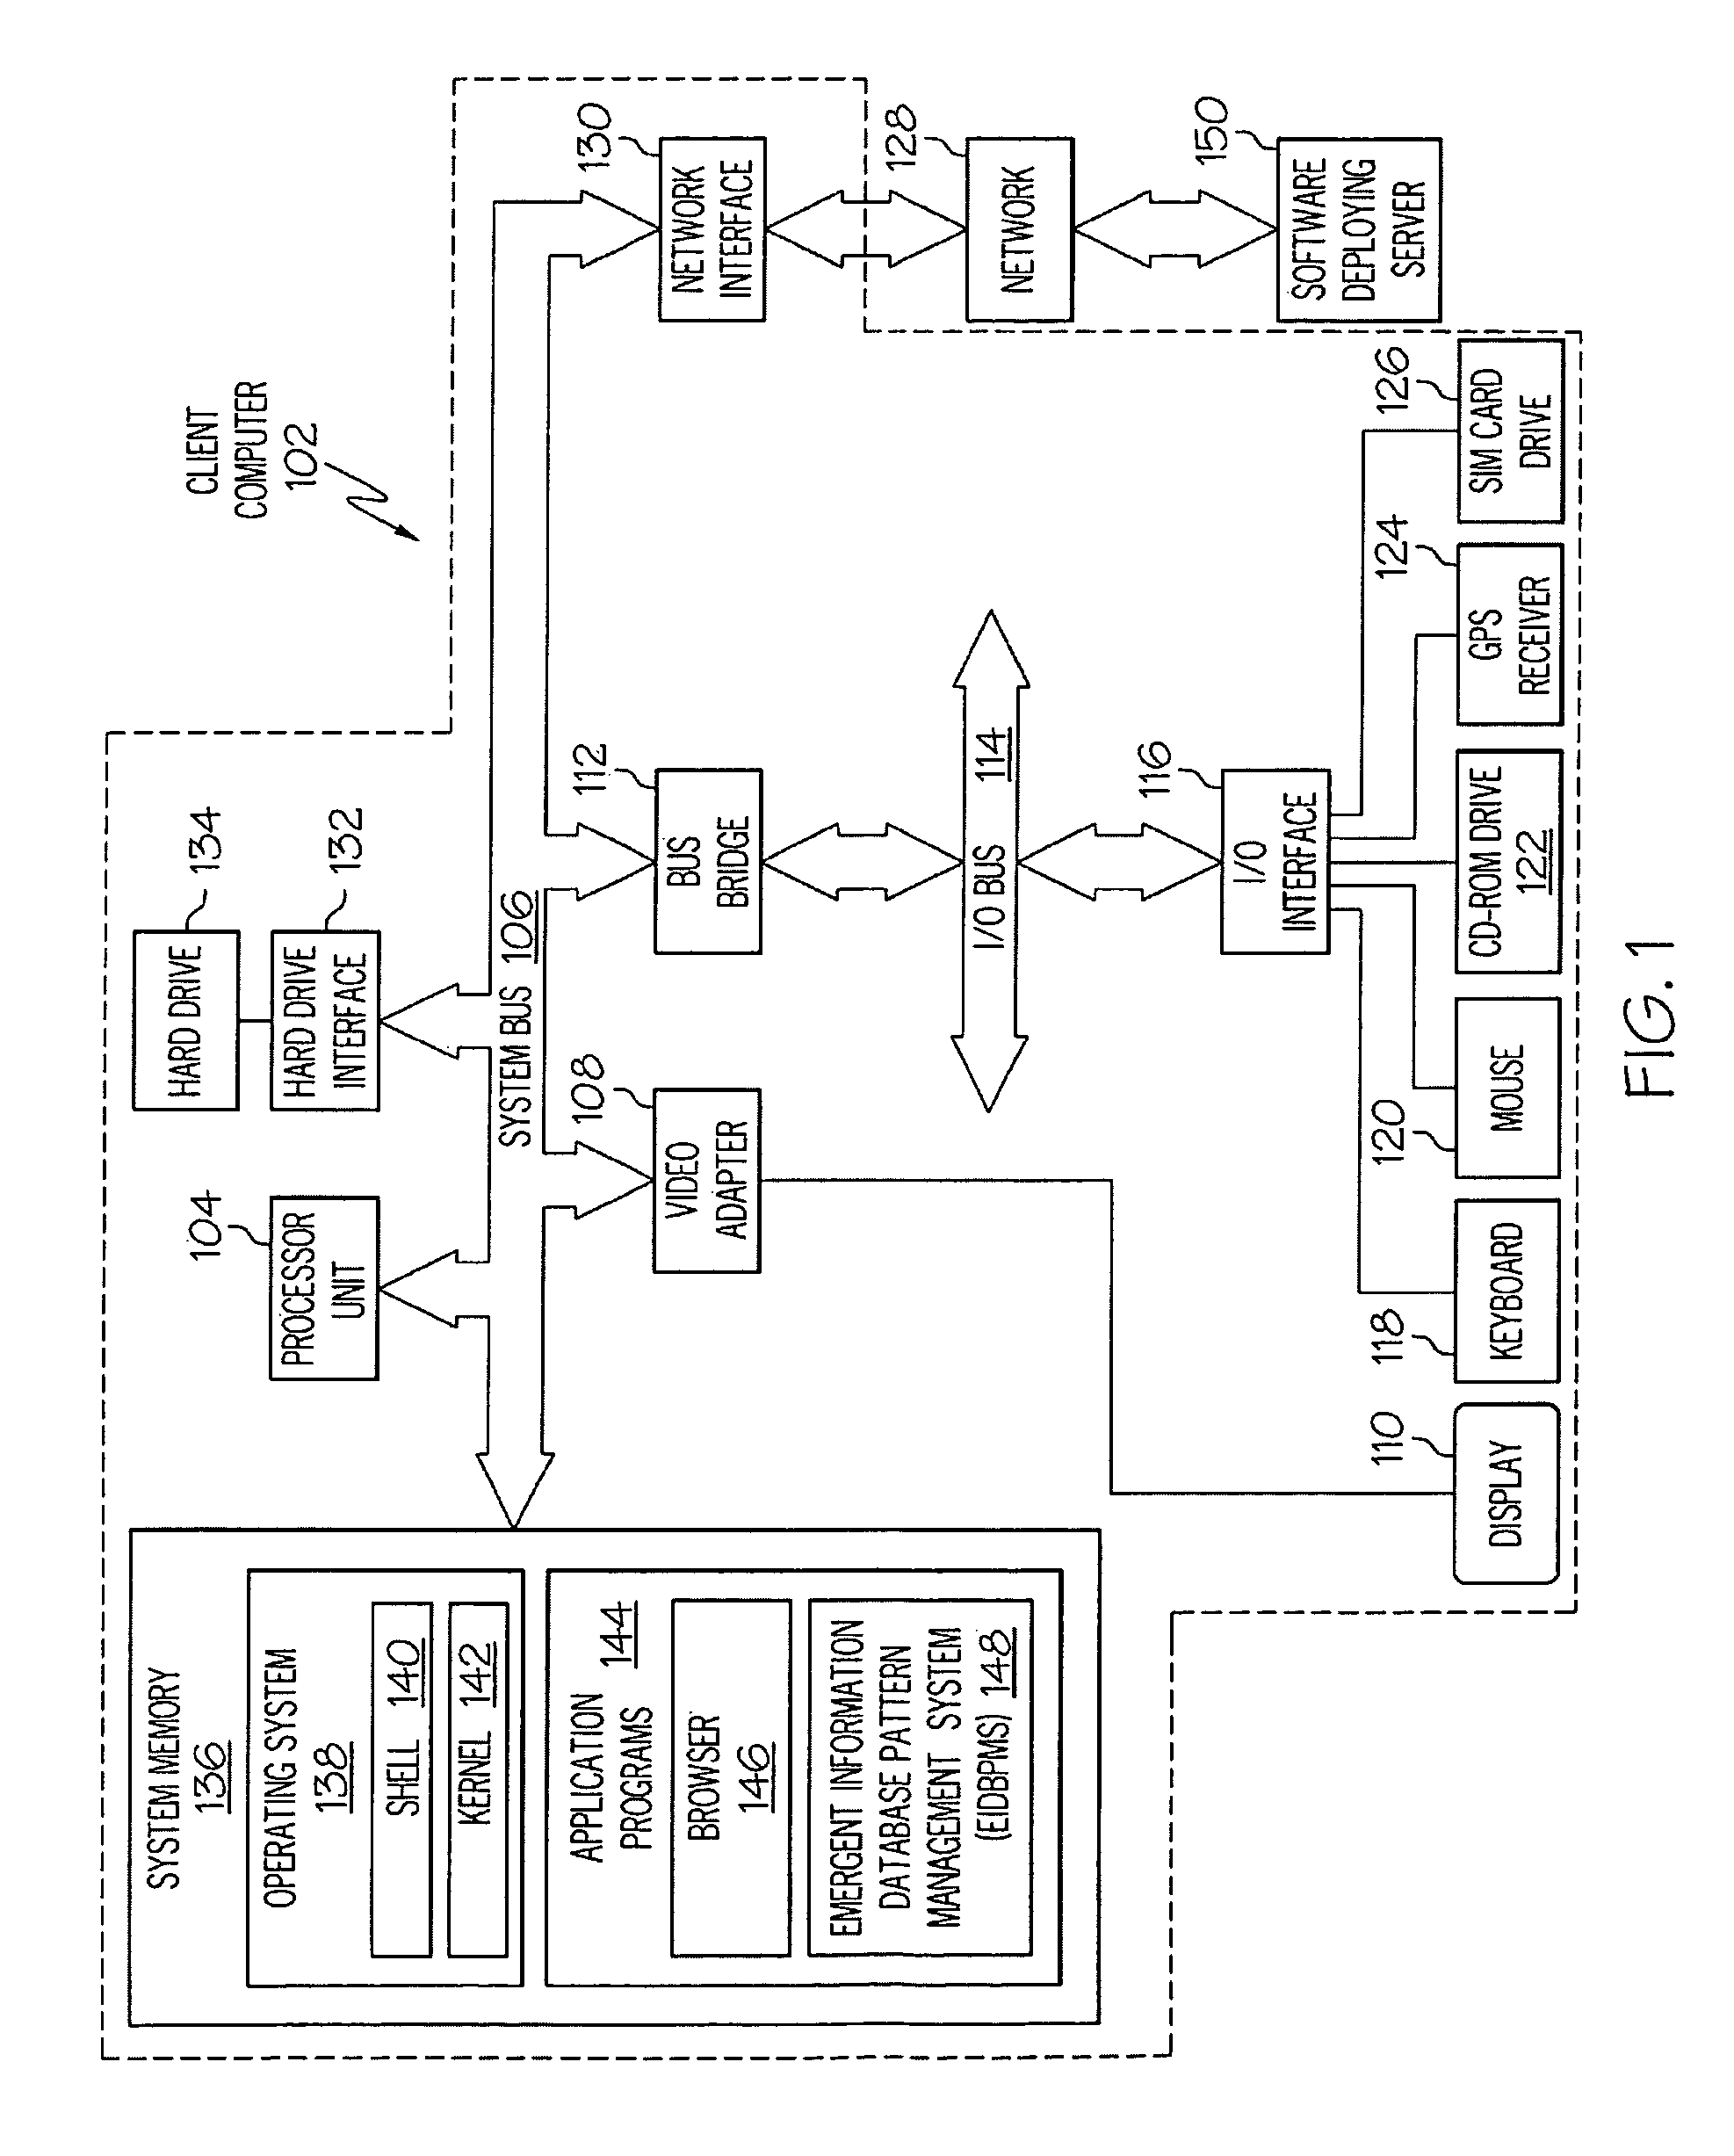 Data pattern generation, modification and management utilizing a semantic network-based graphical interface